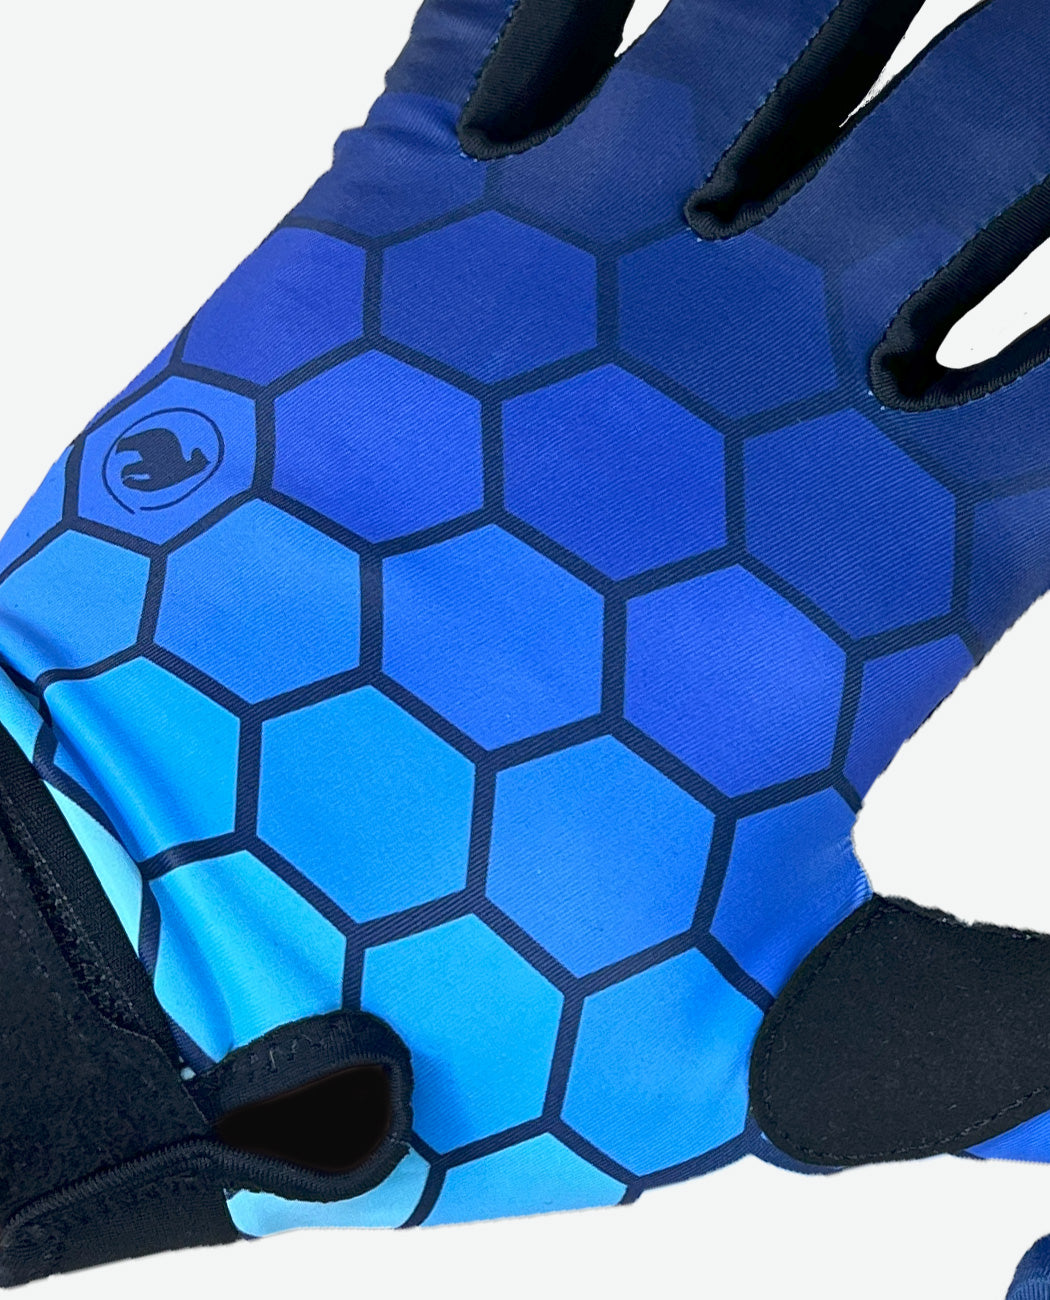 Bicycle glove “System”